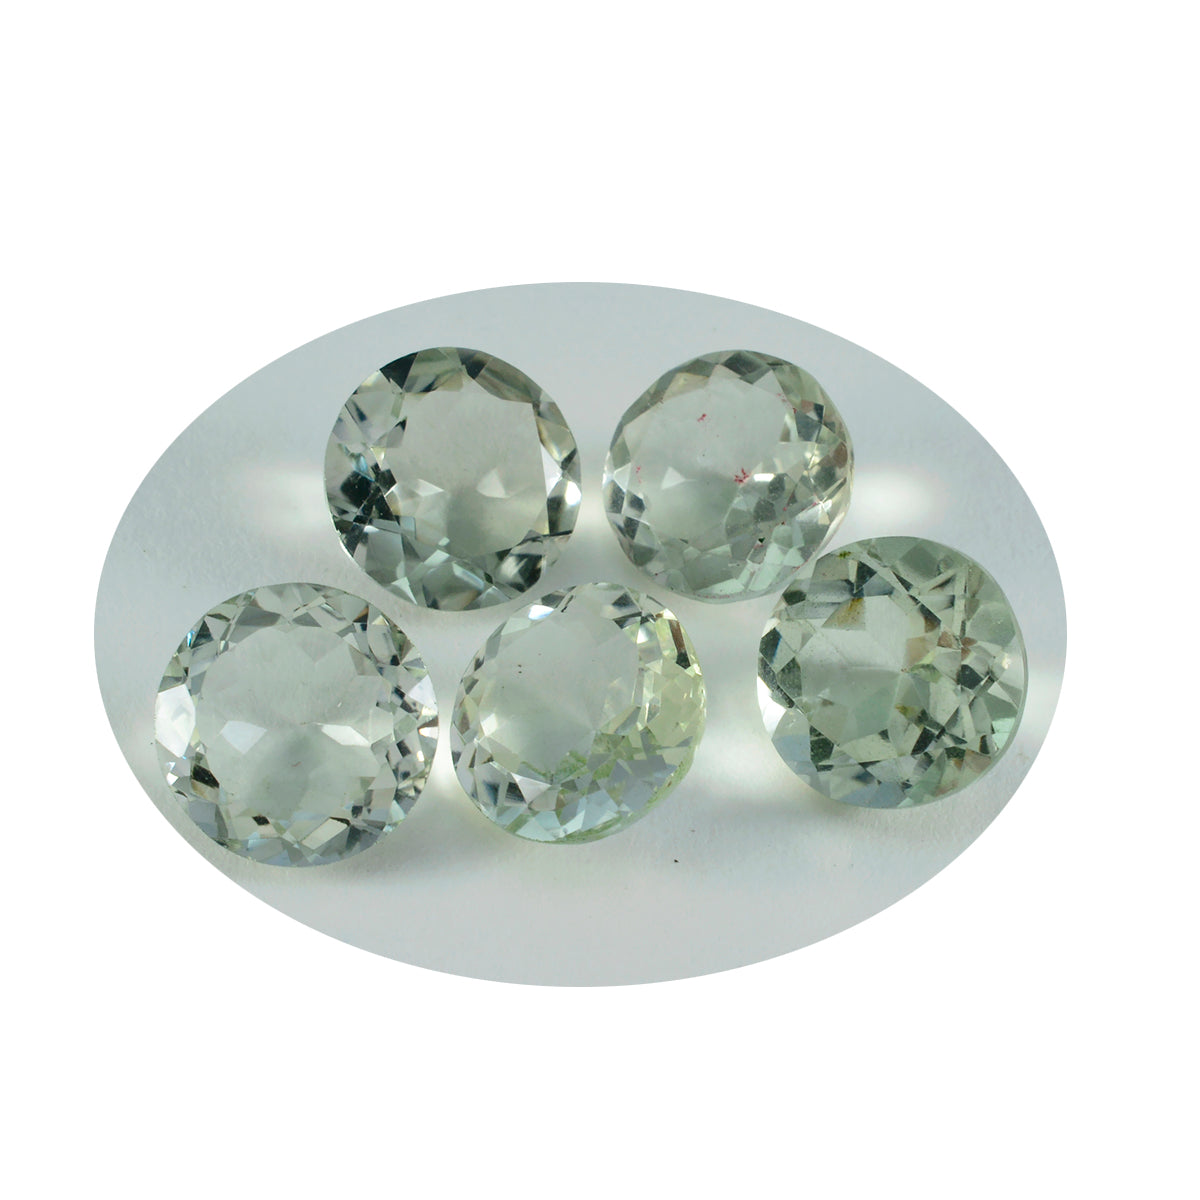 Riyogems 1PC Green Amethyst Faceted 14x14 mm Round Shape startling Quality Loose Stone